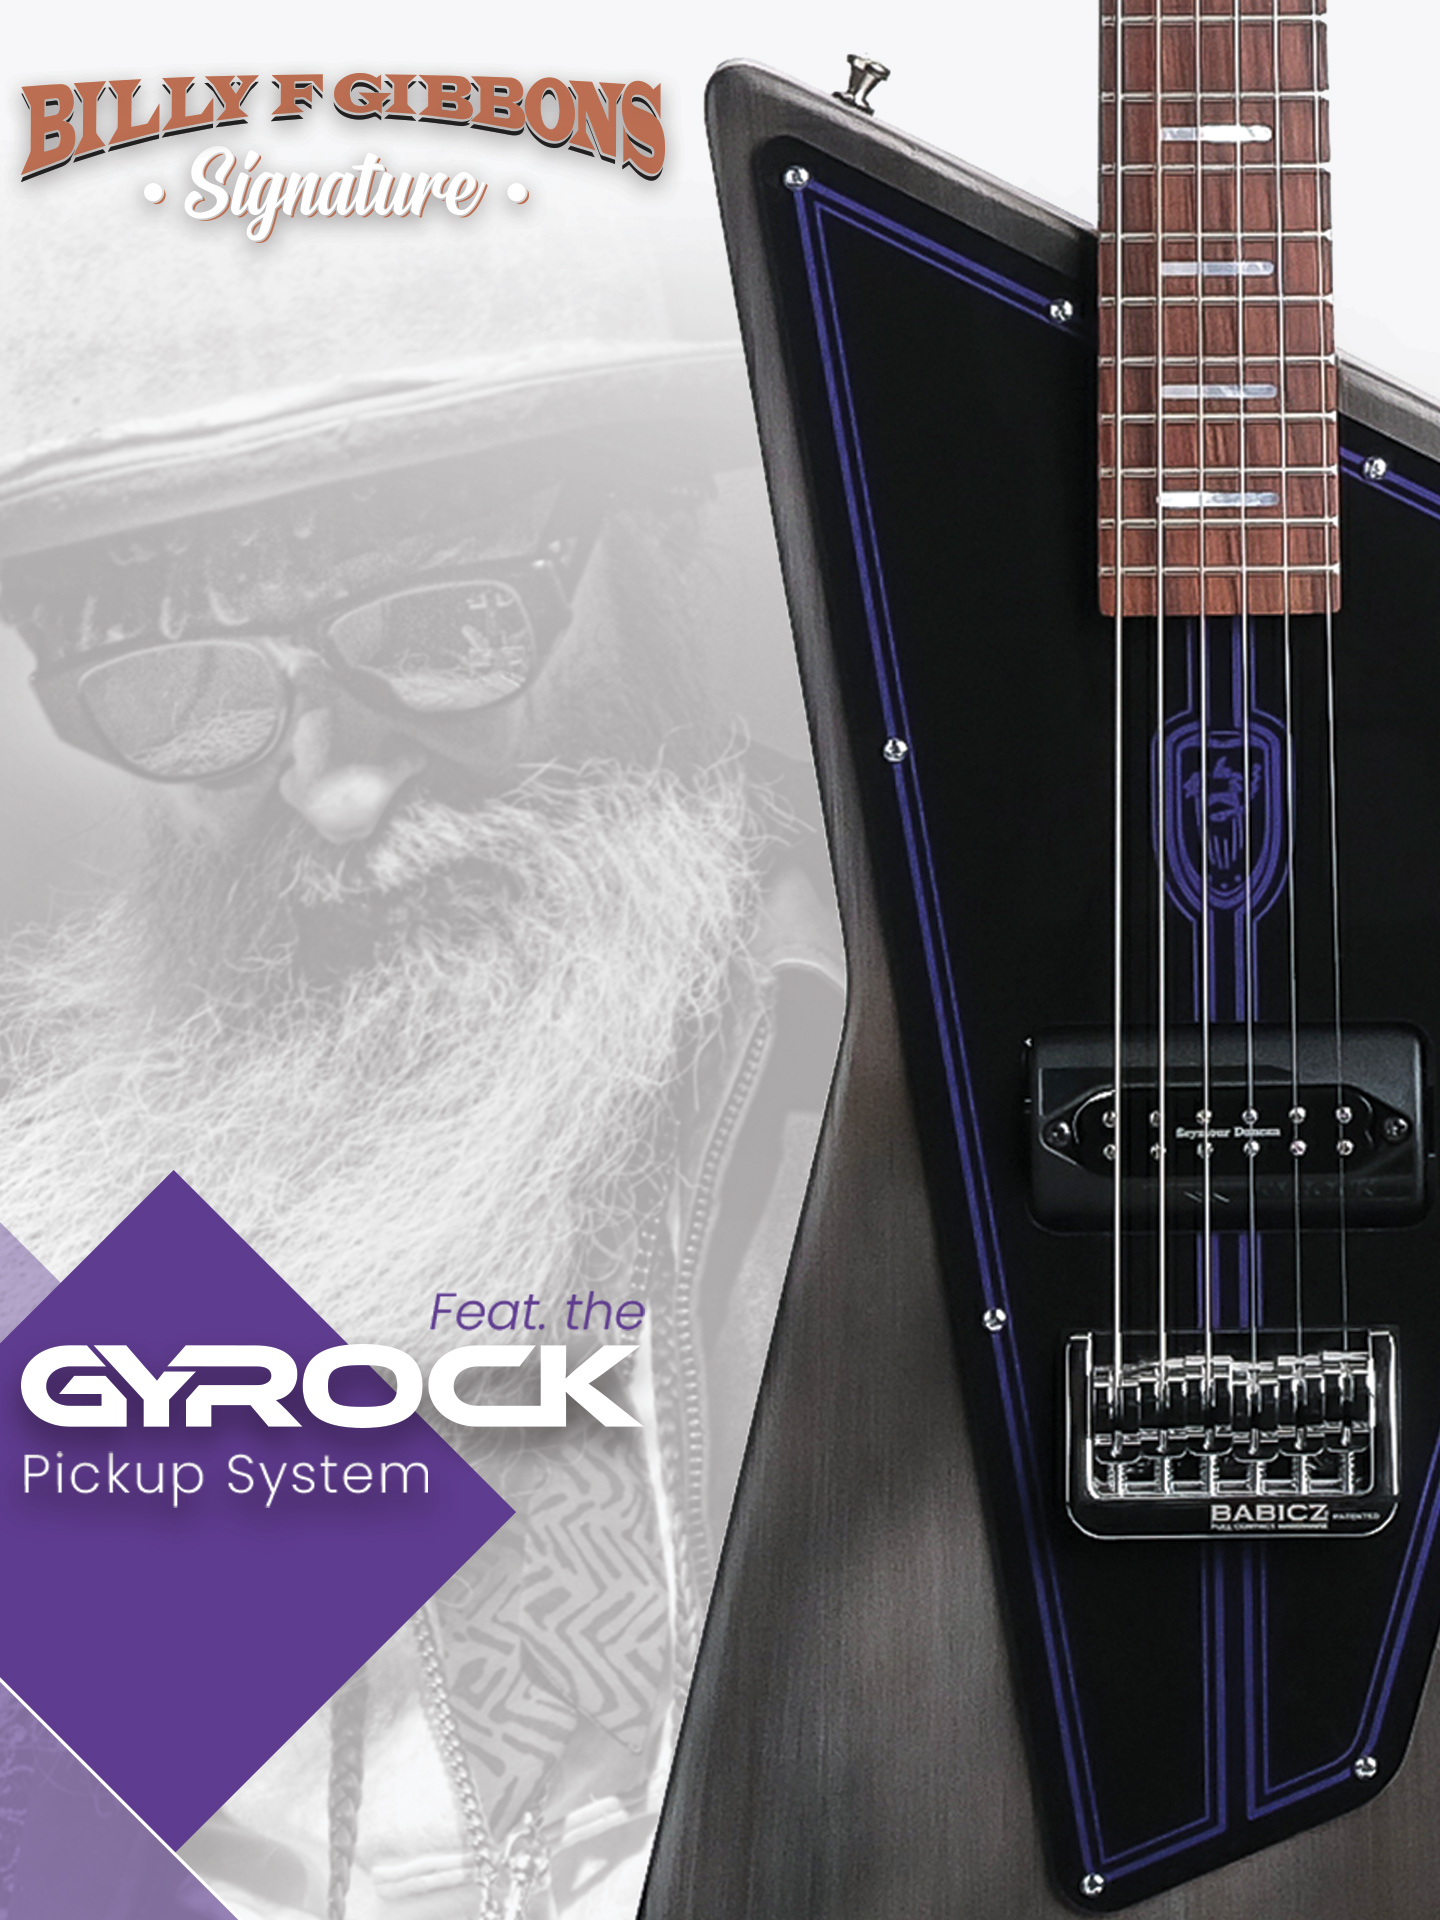 Edition limitée Wild Customs Gyrock Billy Gibbons Signature